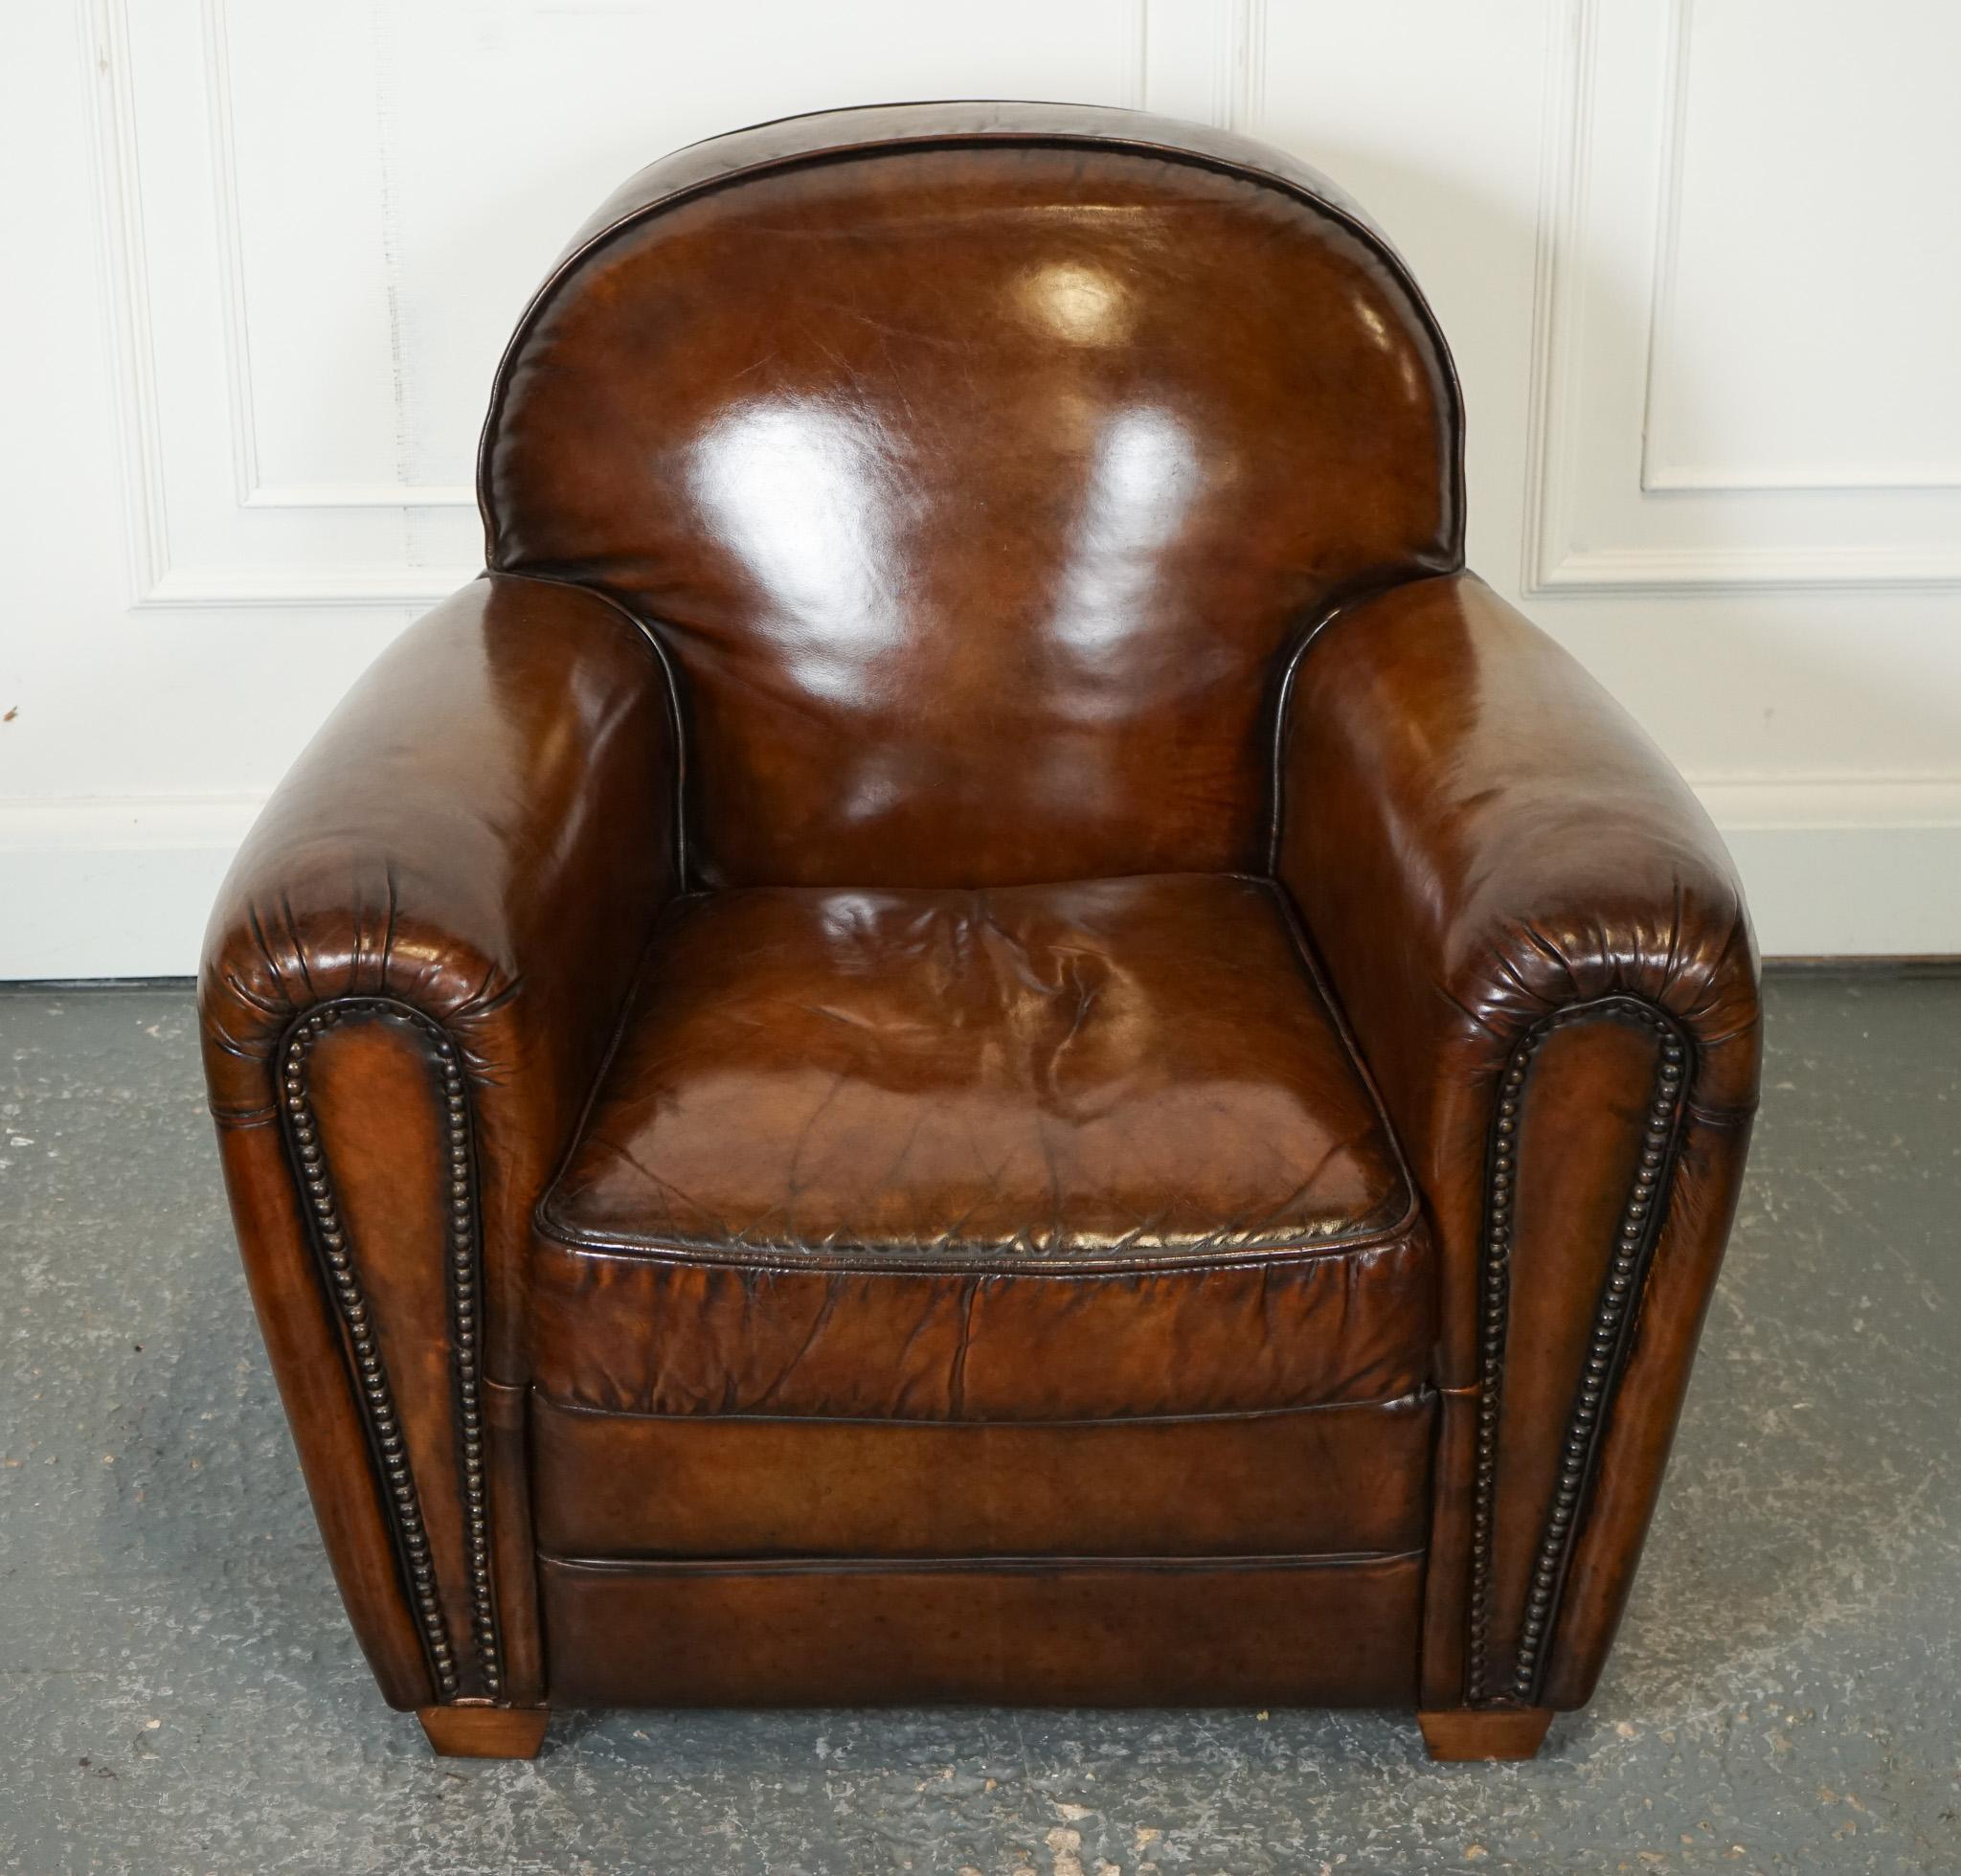 STUNNING PAiR OF ART DECO Style HAND DYED WHISKEY BROWN CLUB ARMCHAIRS (Leder) im Angebot